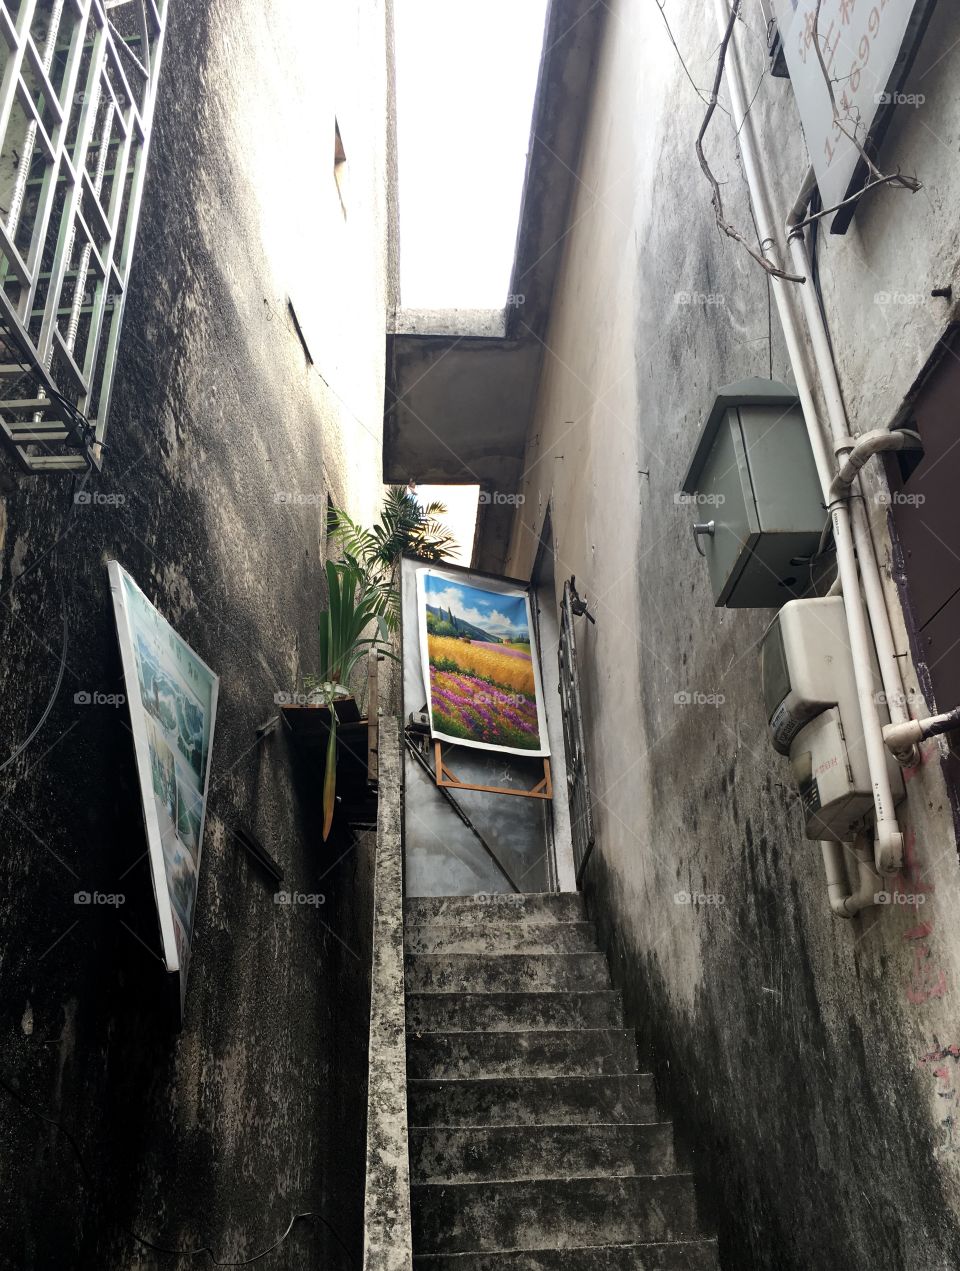 Painting at the top of Stairs - Dafen Oil Painting Village in Shenzhen, China